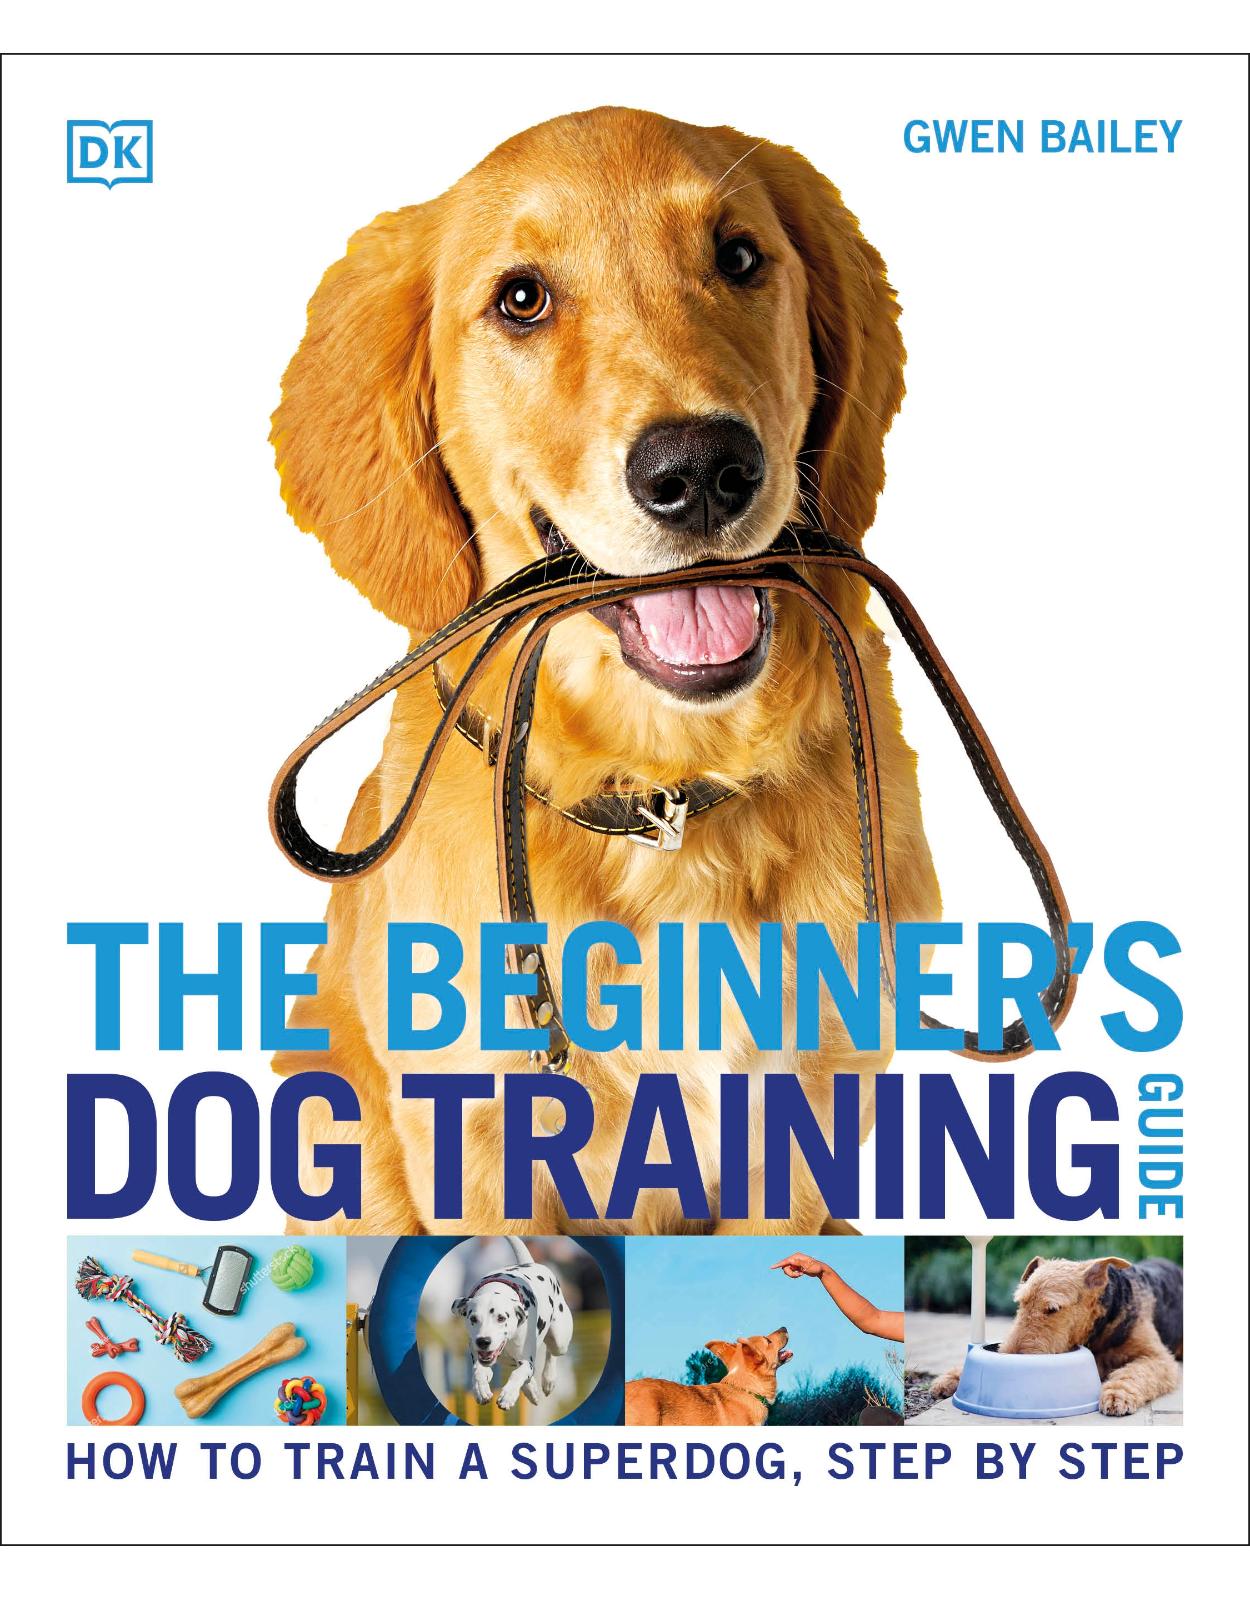 The Beginner’s Dog Training Guide: How to Train a Superdog, Step by Step